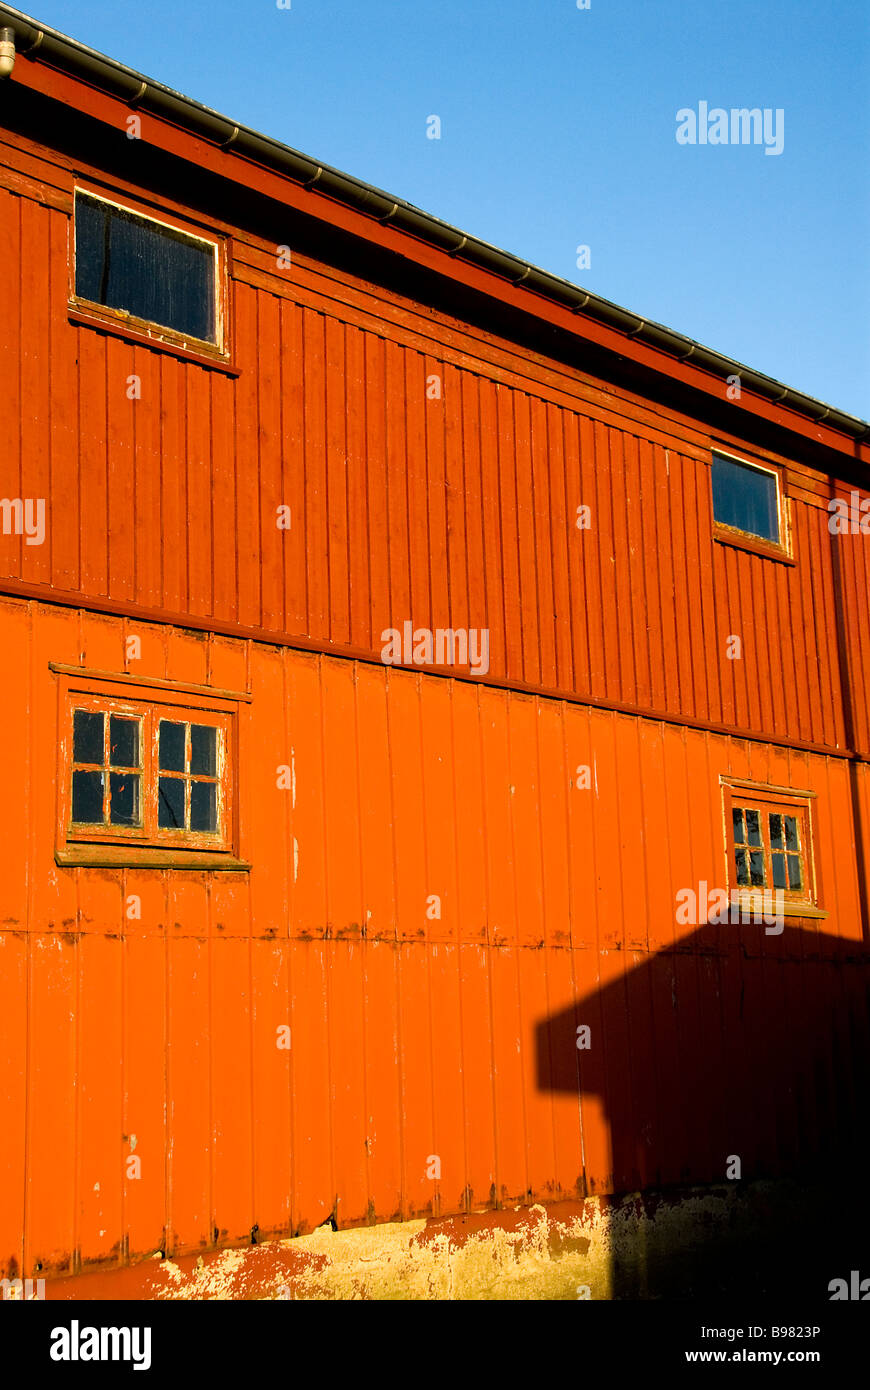 Old wooden ware houses painted red Jutland Denmark Stock Photo